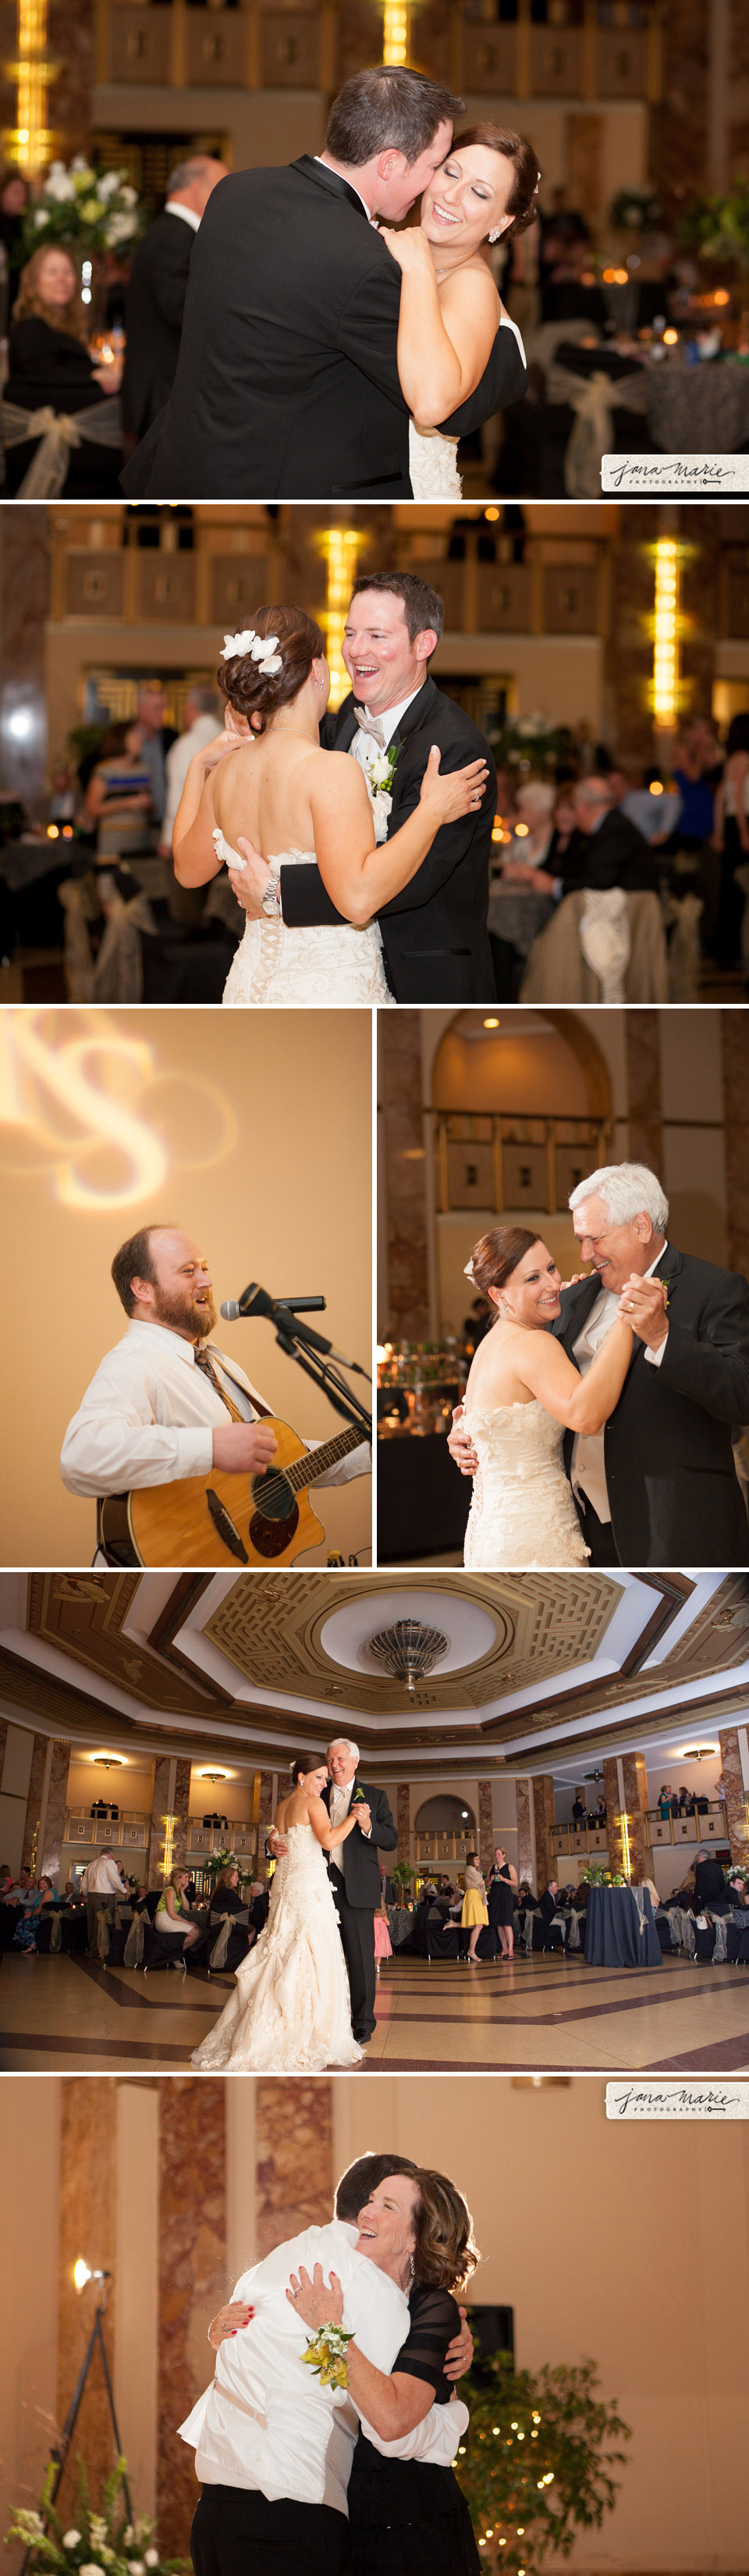 father daughter dance, mother son dance, silly friends, family, Kansas City DJ services, beautiful architecture